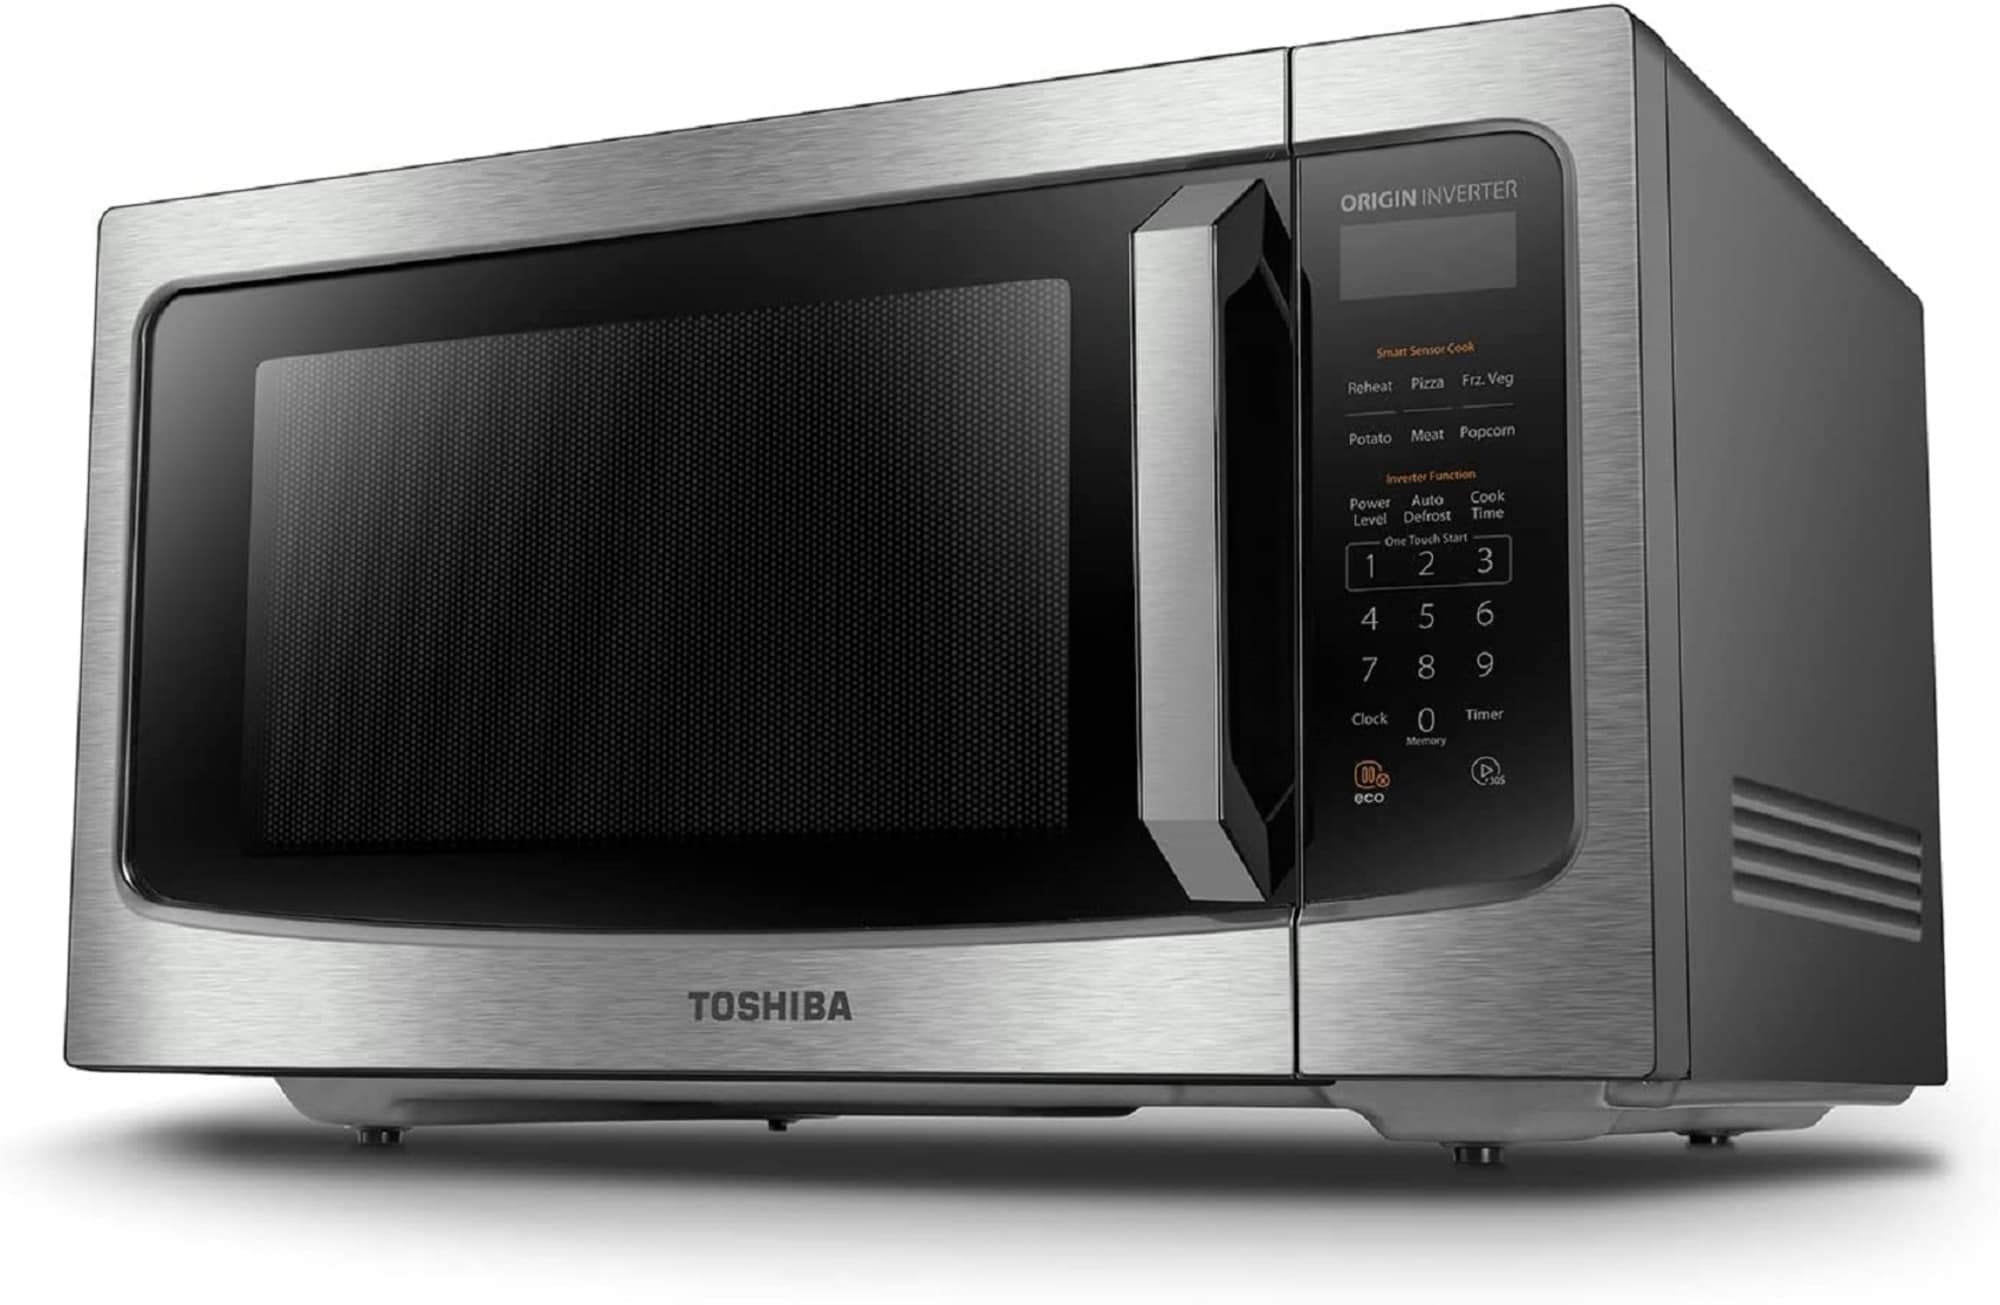 Toshiba ML-EM45PIT(SS) Microwave Oven with Inverter Technology, LCD Display and Smart Sensor, 1.6 cu.ft, Stainless Steel